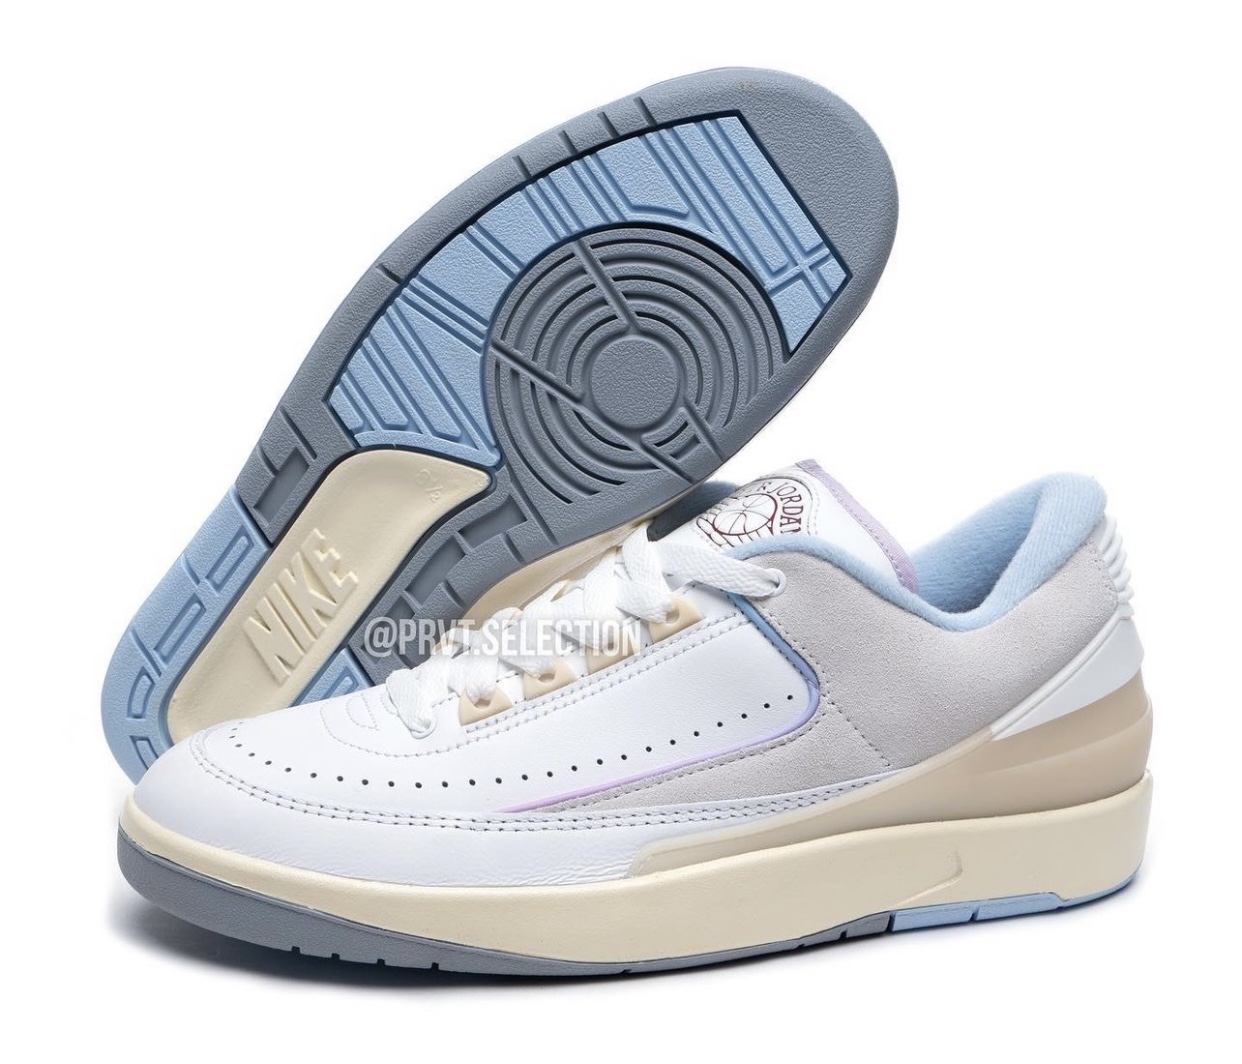 Air Jordan 2 Low Look Up In The Air DX4401-146 WMNS Release Date Where to Buy